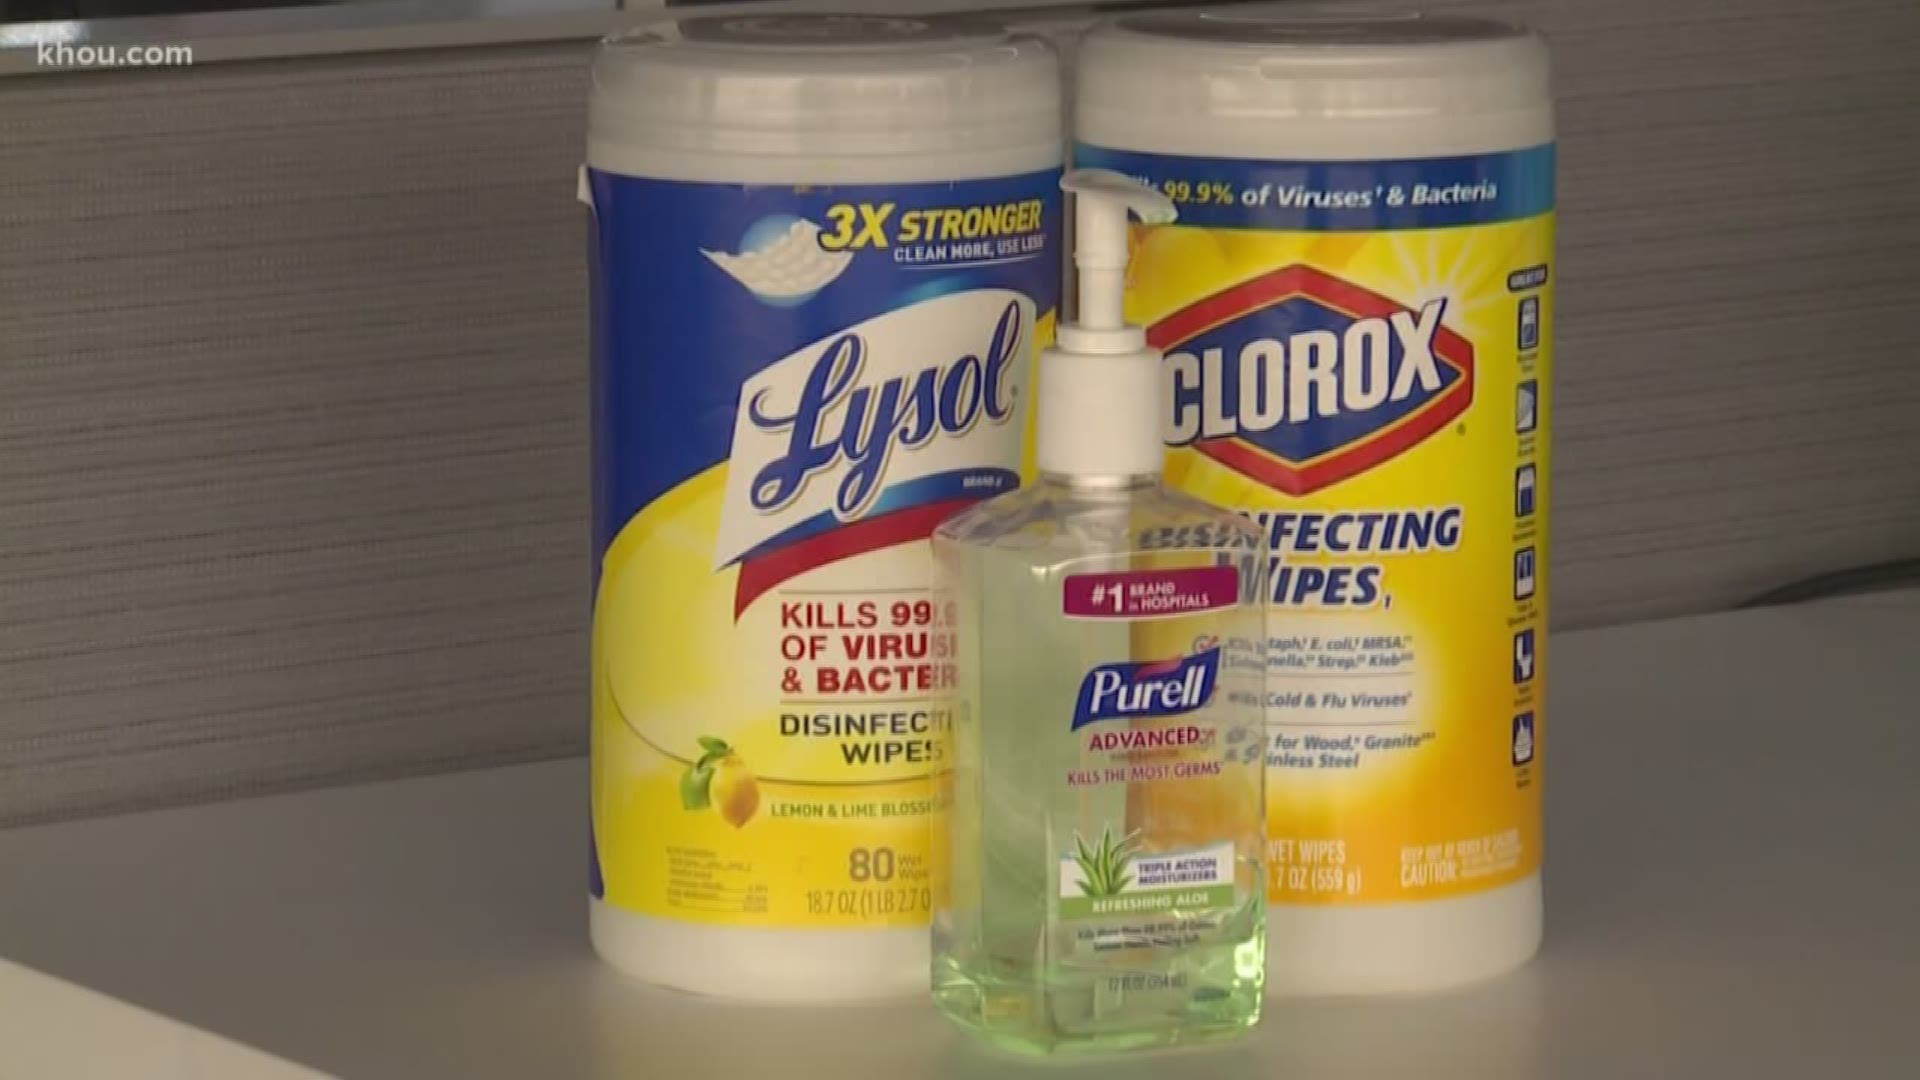 Despite restrictions on sanitizer and hand soap, shelves are empty at stores across the Houston area.